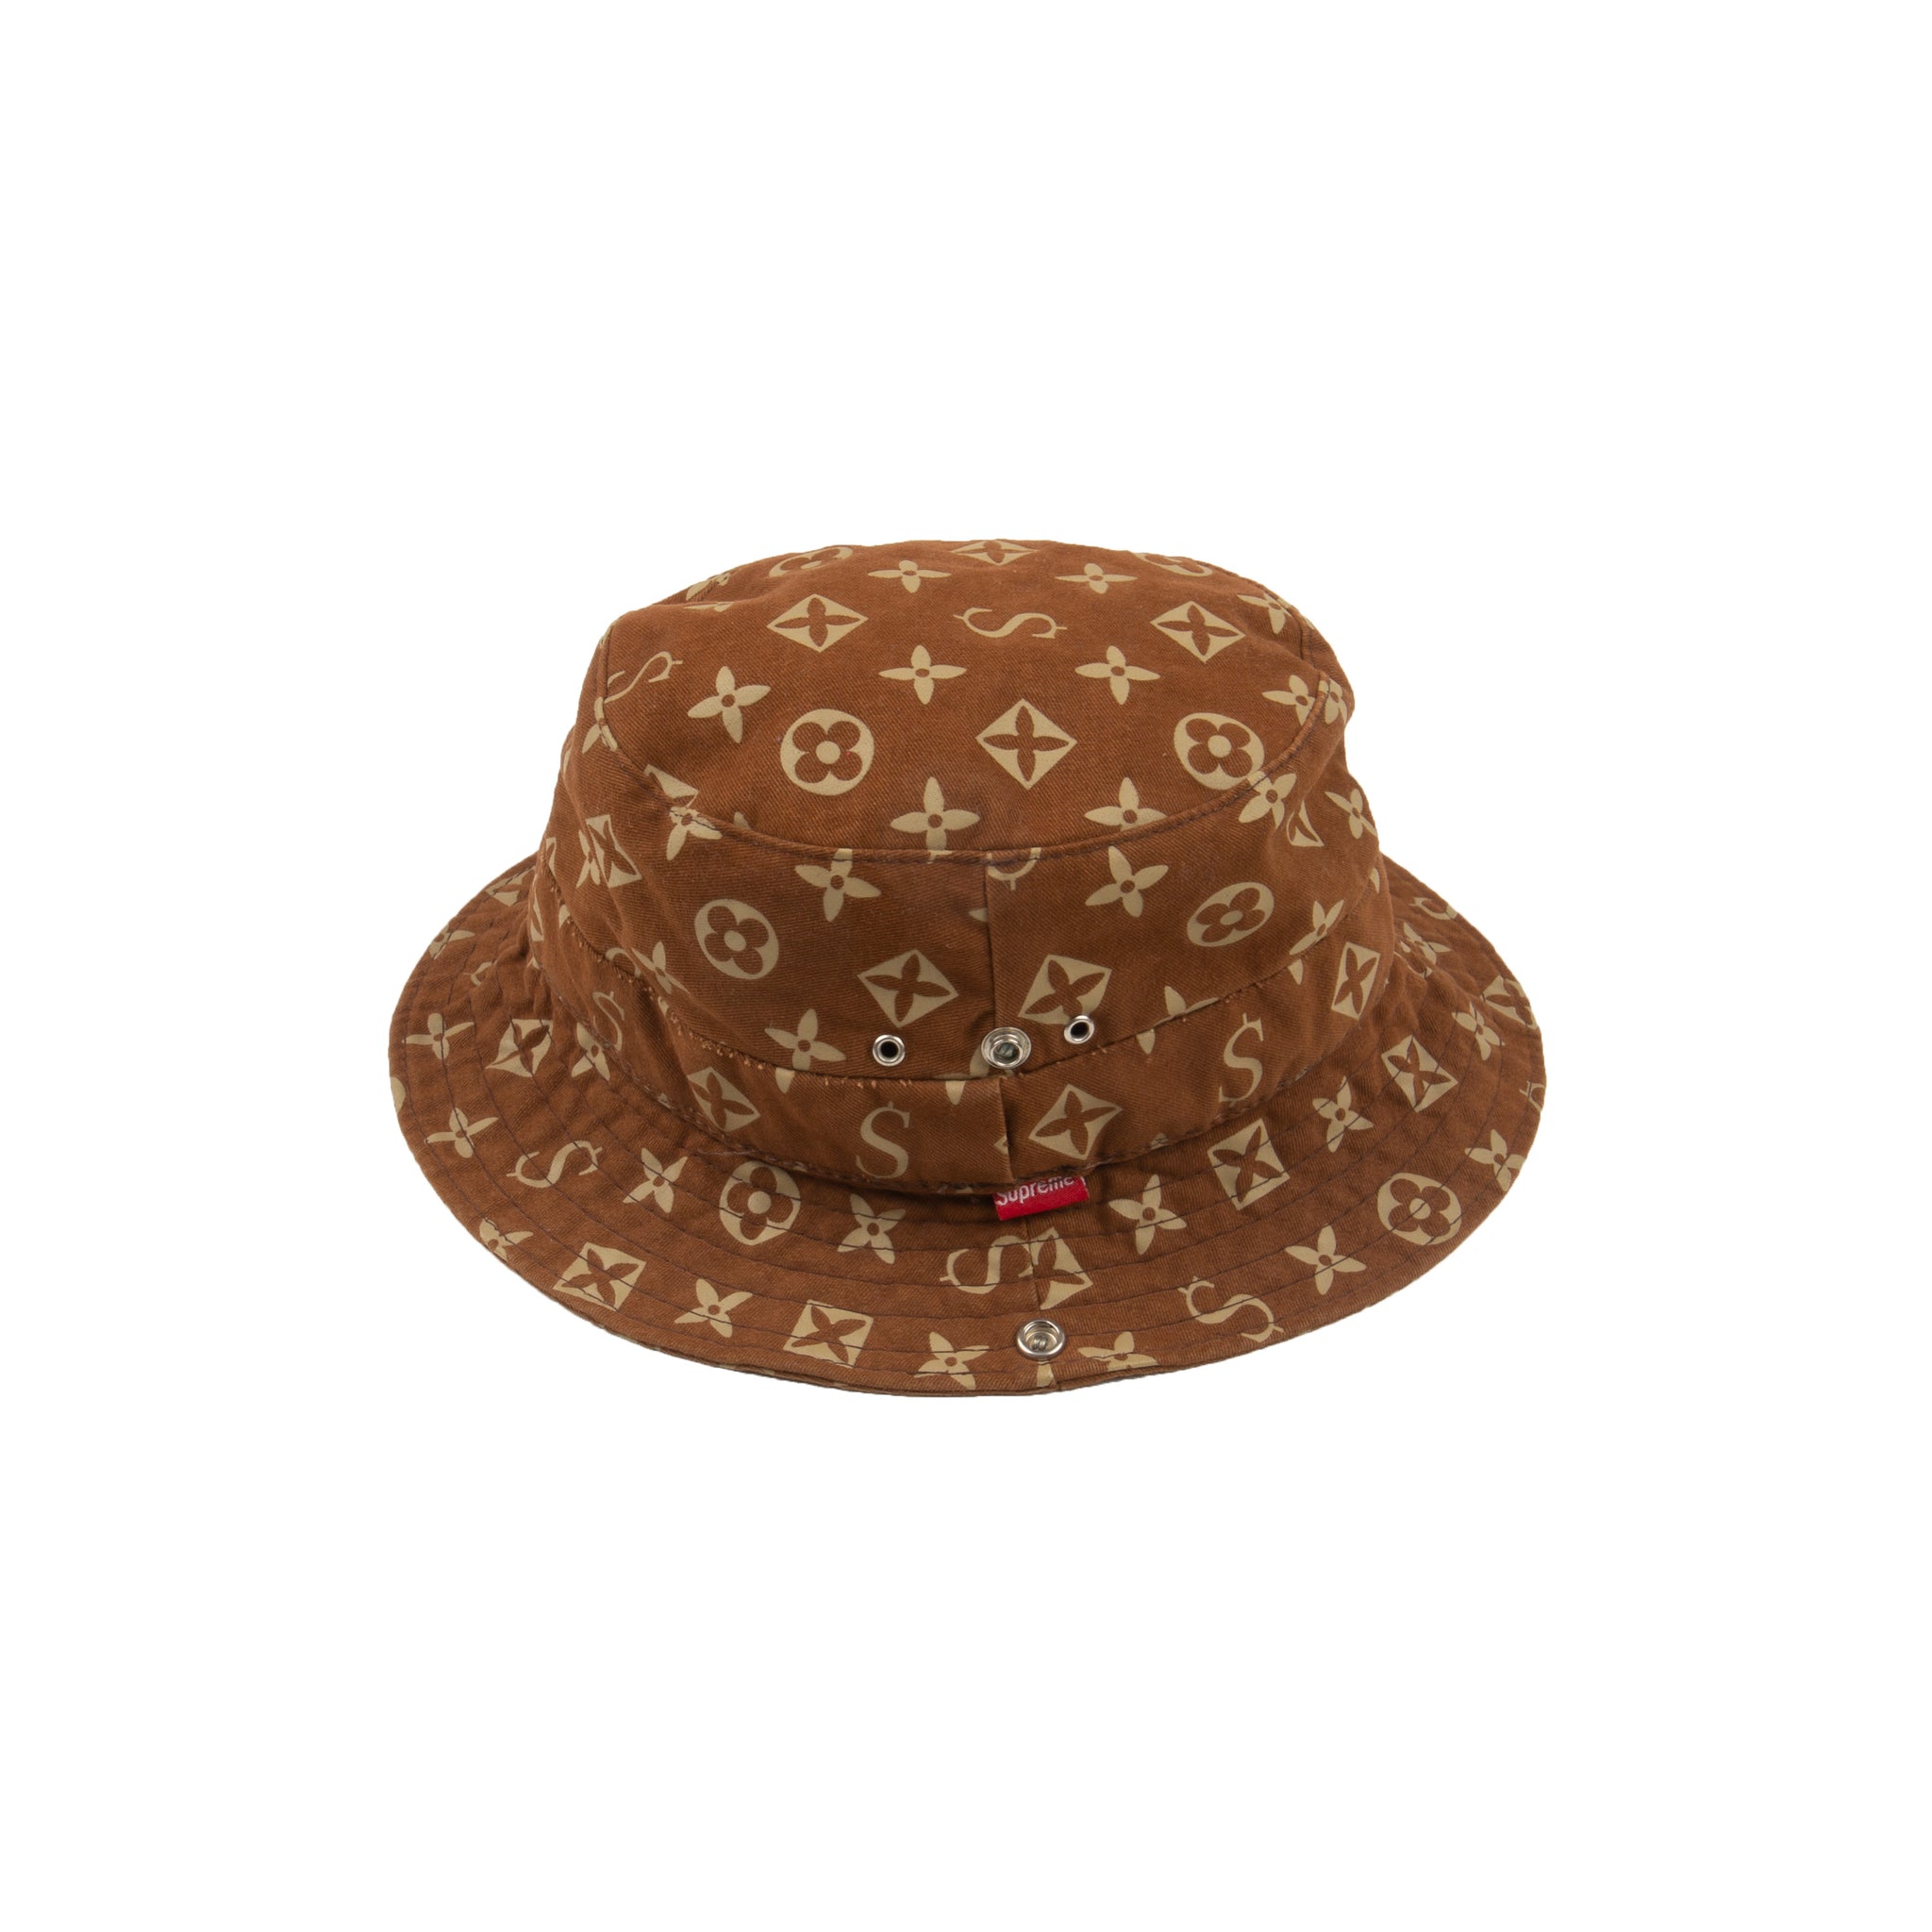 SS17 Supreme x Louis Vuitton Camo Camp Cap Mens Fashion Watches   Accessories Cap  Hats on Carousell